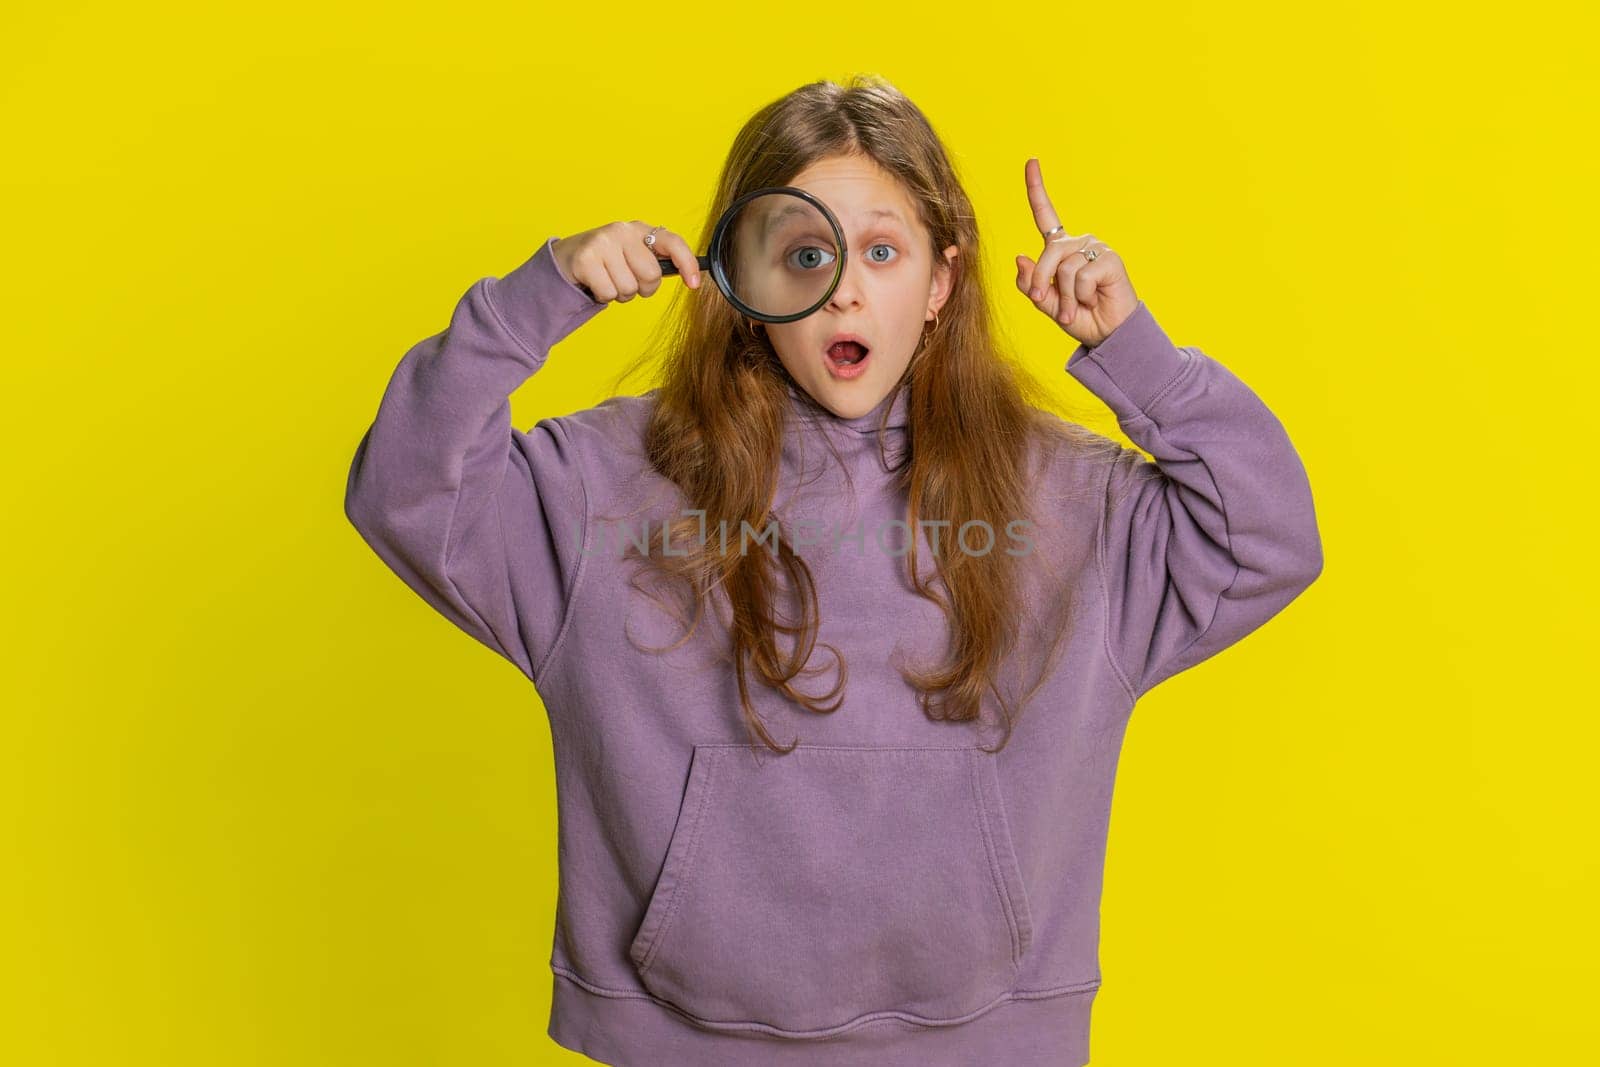 Investigator researcher scientist preteen child girl kid holding magnifying glass near face, looking into camera with big zoomed funny eye searching analyzing inspiration motivation, yellow background